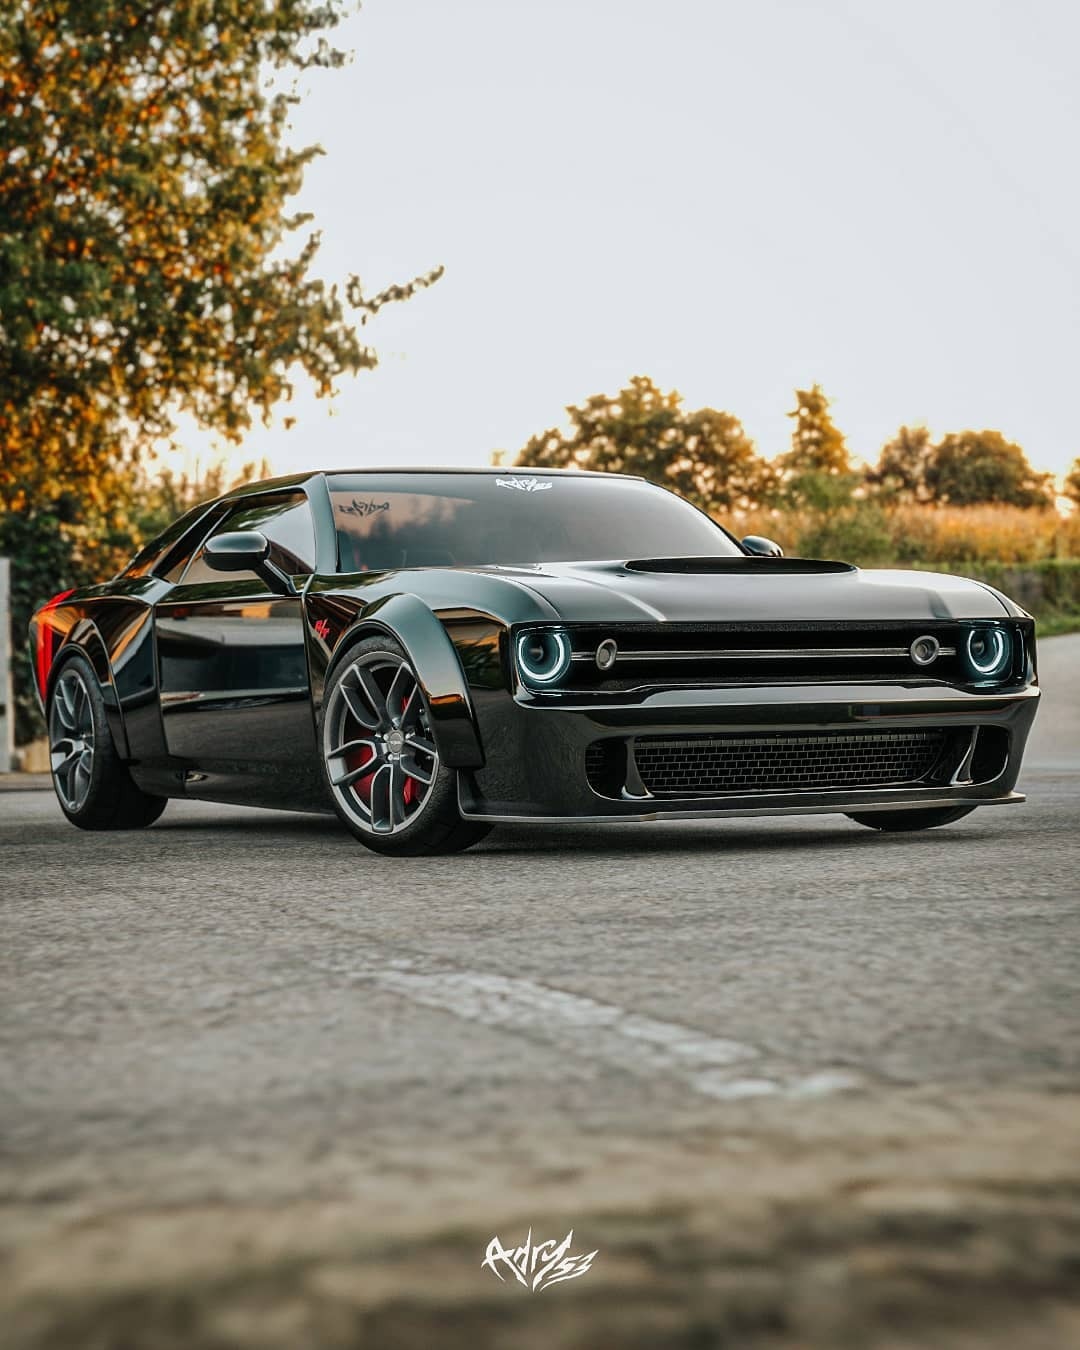 Dodge's Muscle Car Gets a Digital Facelift, Just Don't Call It a Challenger  - autoevolution